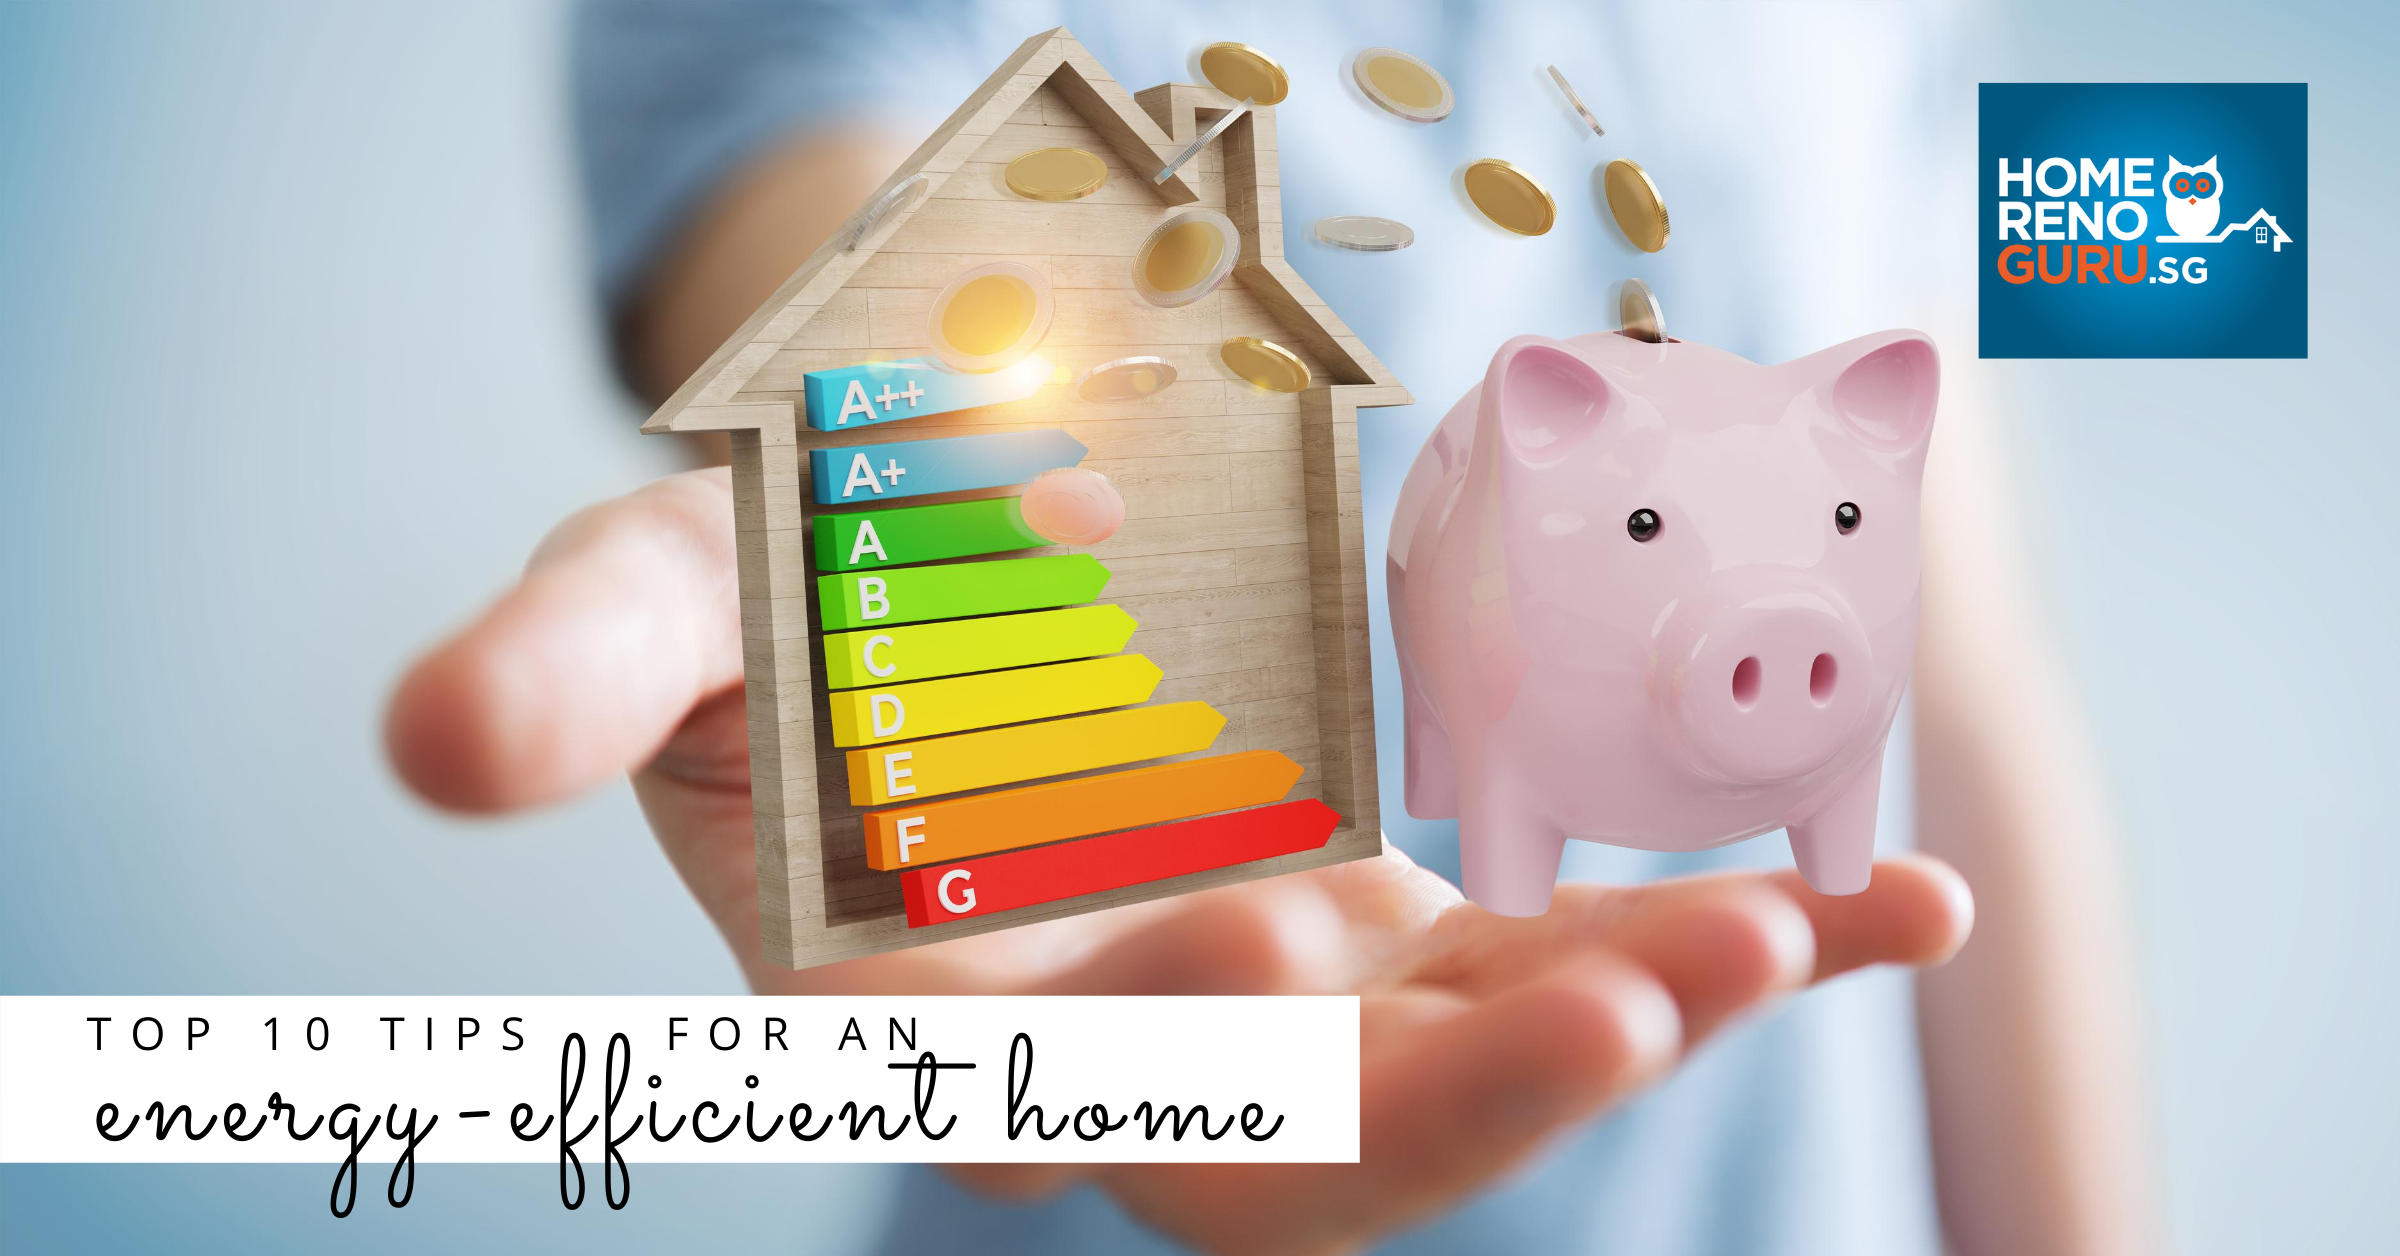 Top 10 Tips for an Energy-Efficient Home